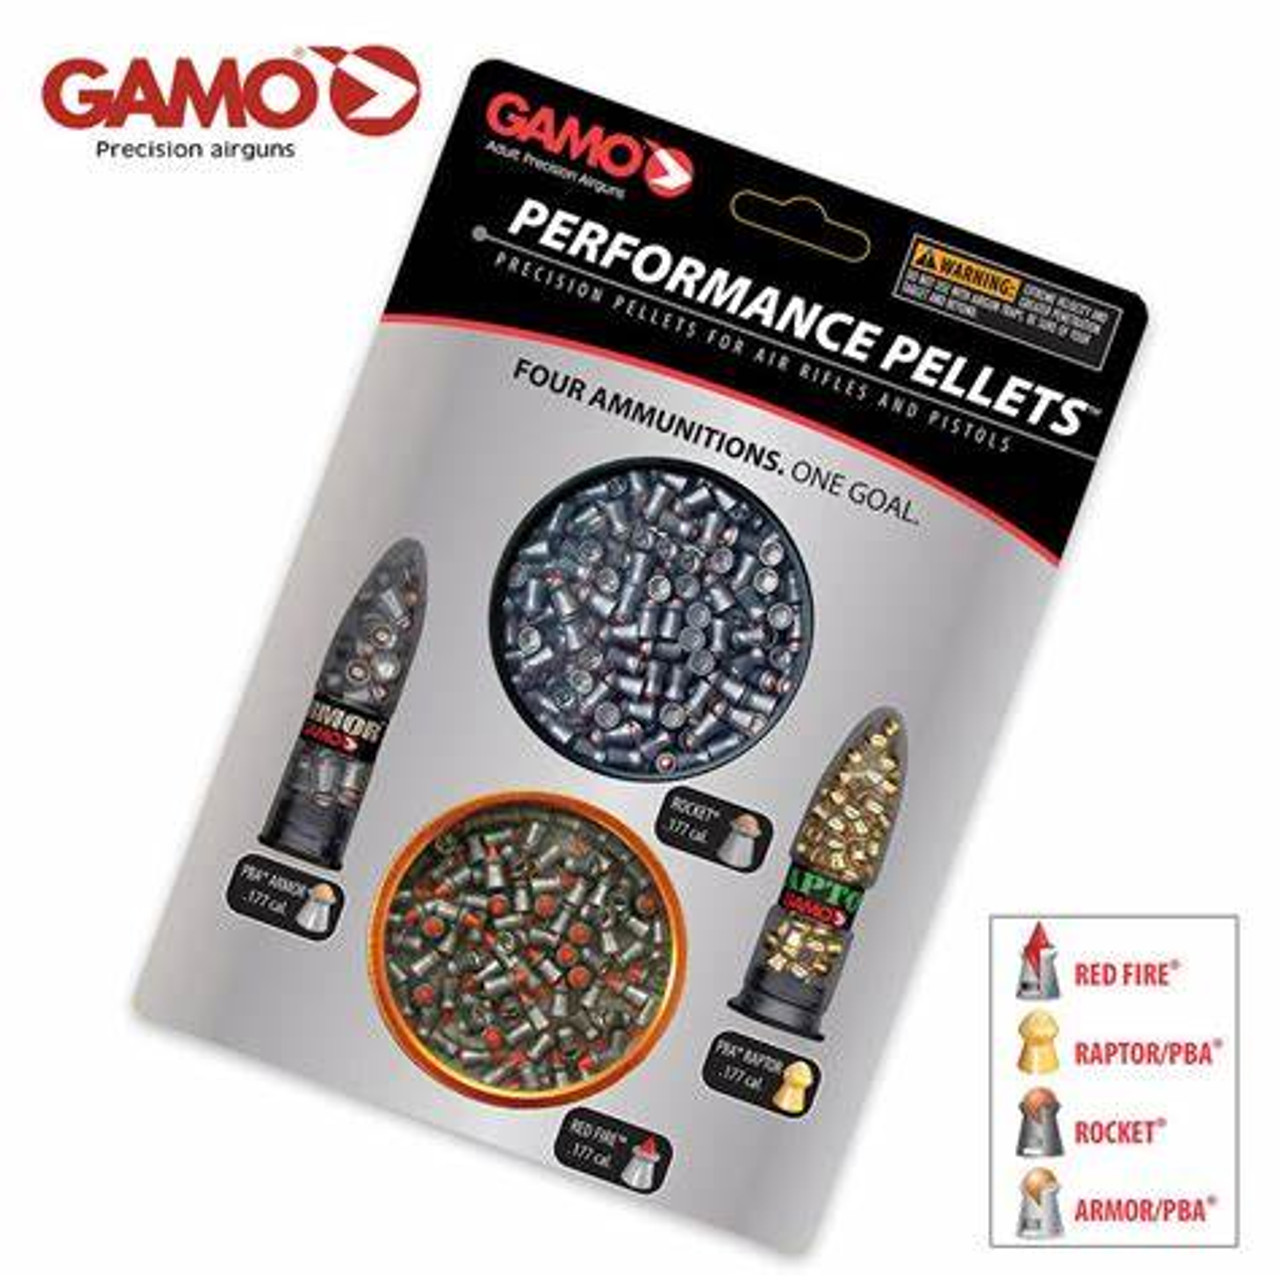 The Gamo® Performance Pellets Combo Pack offers premium pellets for any air-gun application from plinking and target shooting to competition shooting and hunting. This pack includes Red Fire, PBA Armor, PBA Raptor, and Rocket pellets.